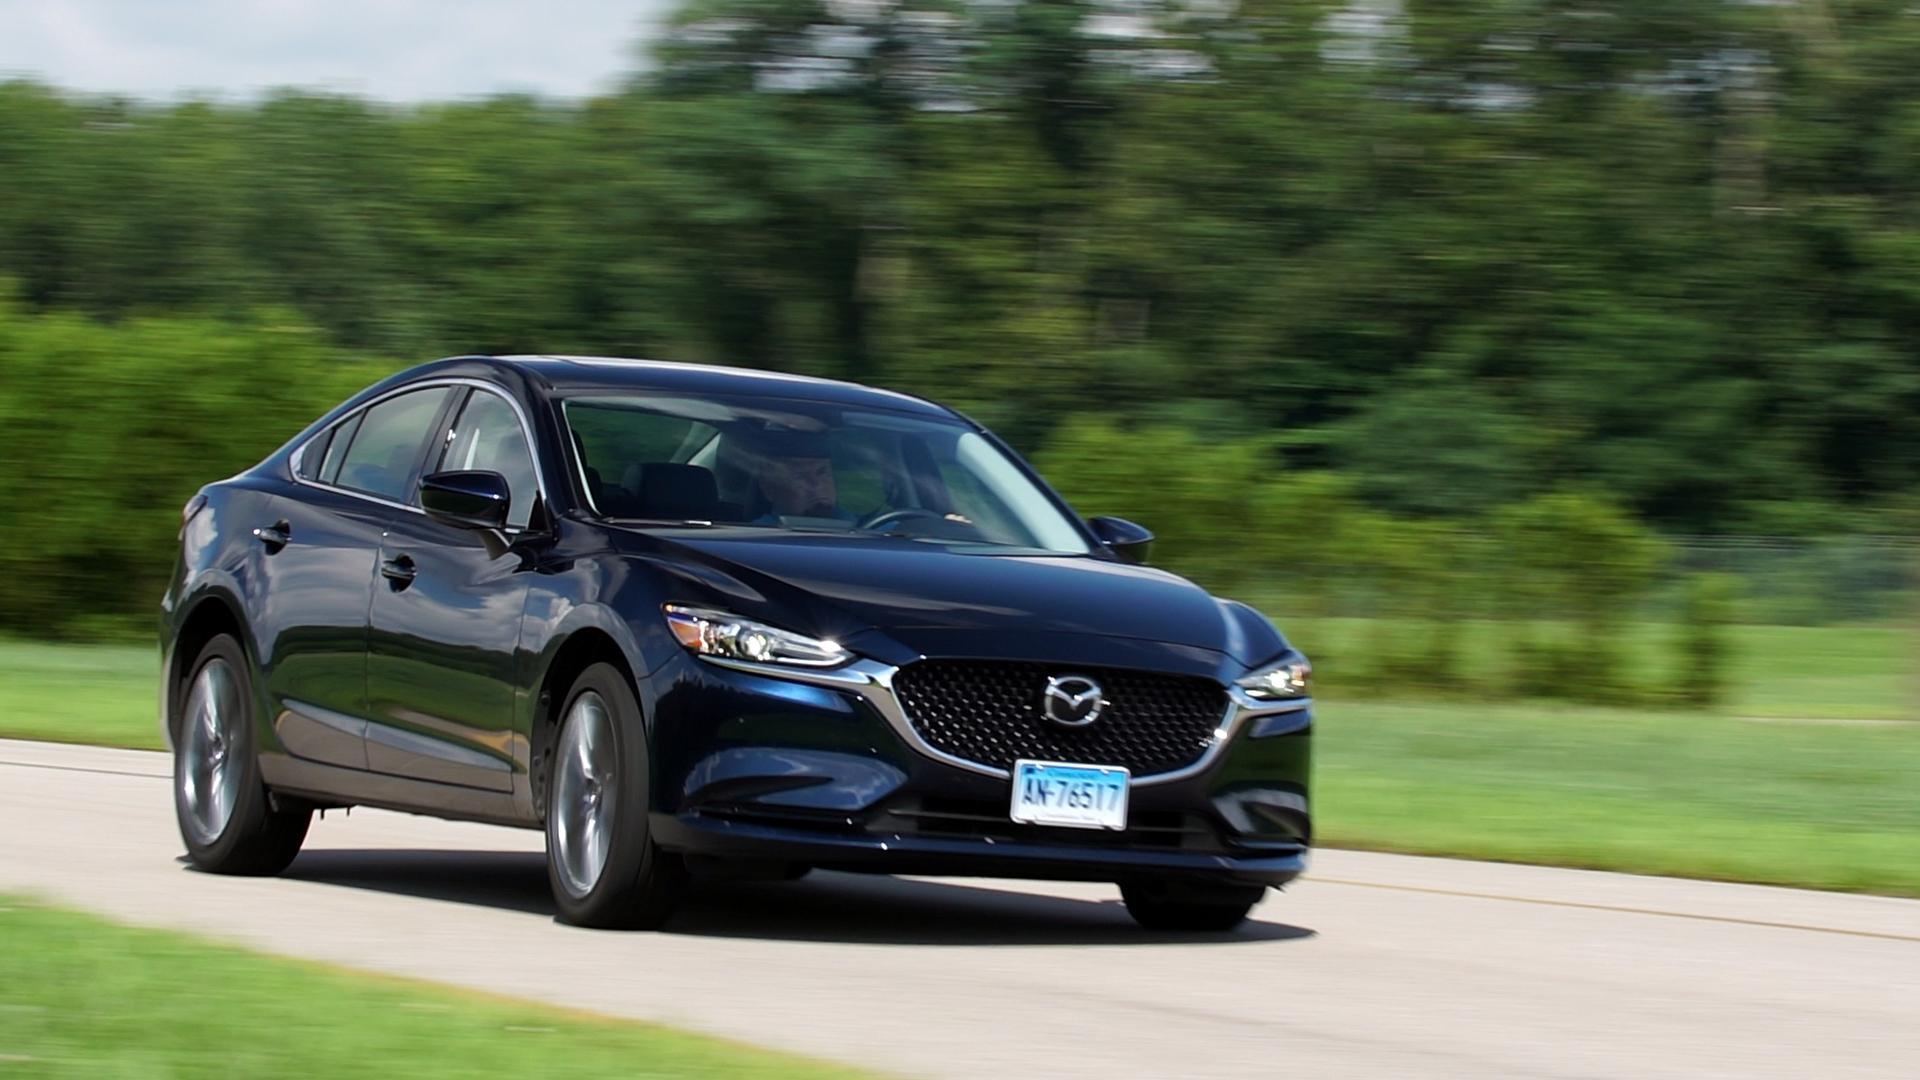 2018 Mazda6 Review: Luxury at a Bargain Price - Consumer Reports